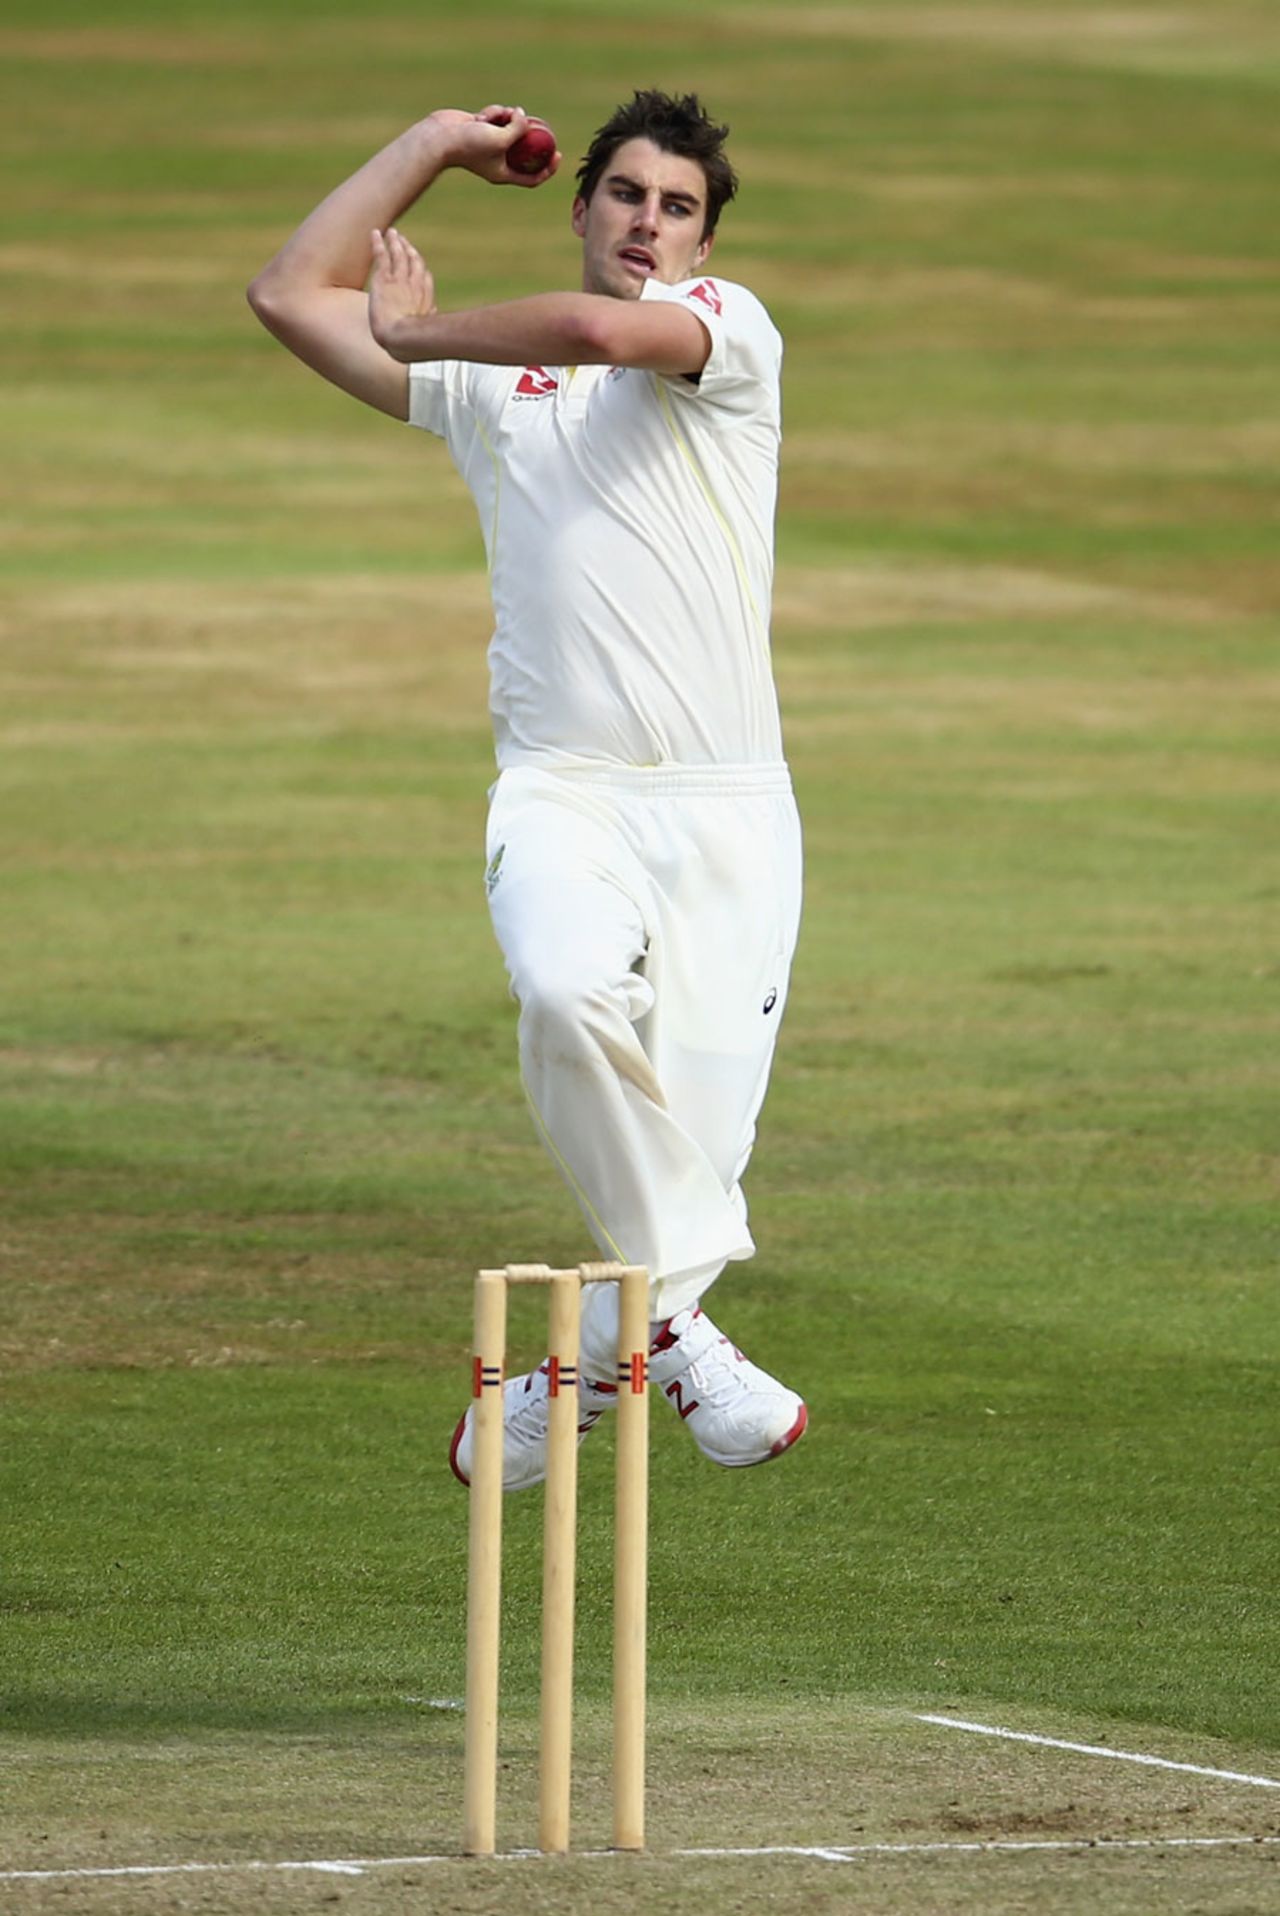 Pat Cummins launches into his delivery stride, Northamptonshire v Australians, Tour match, Northampton, 2nd day, August 15, 2015